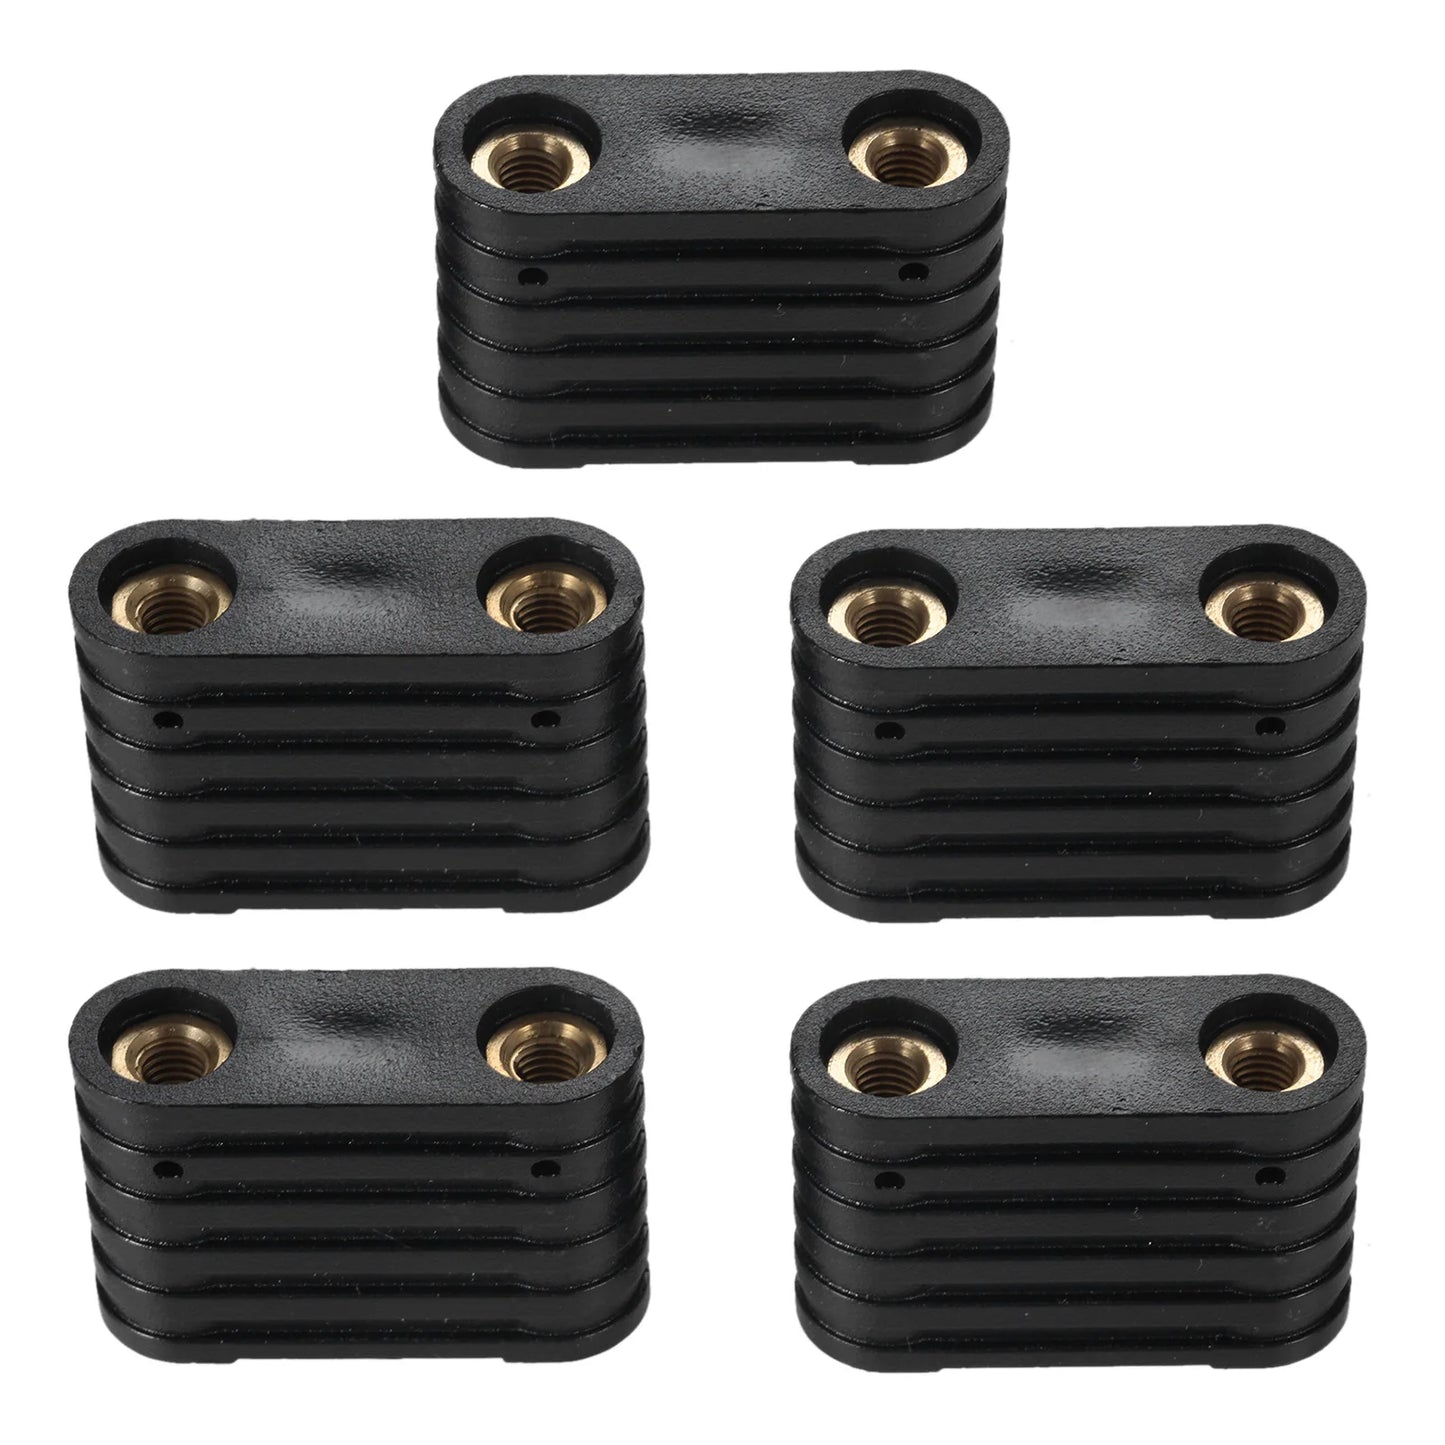 5Pcs Windsurfing Black Plastic SUP 2-hole Footstrap Insert Windsurf Board Footstrap Replacement Kit Surfboard Surfing Accessory